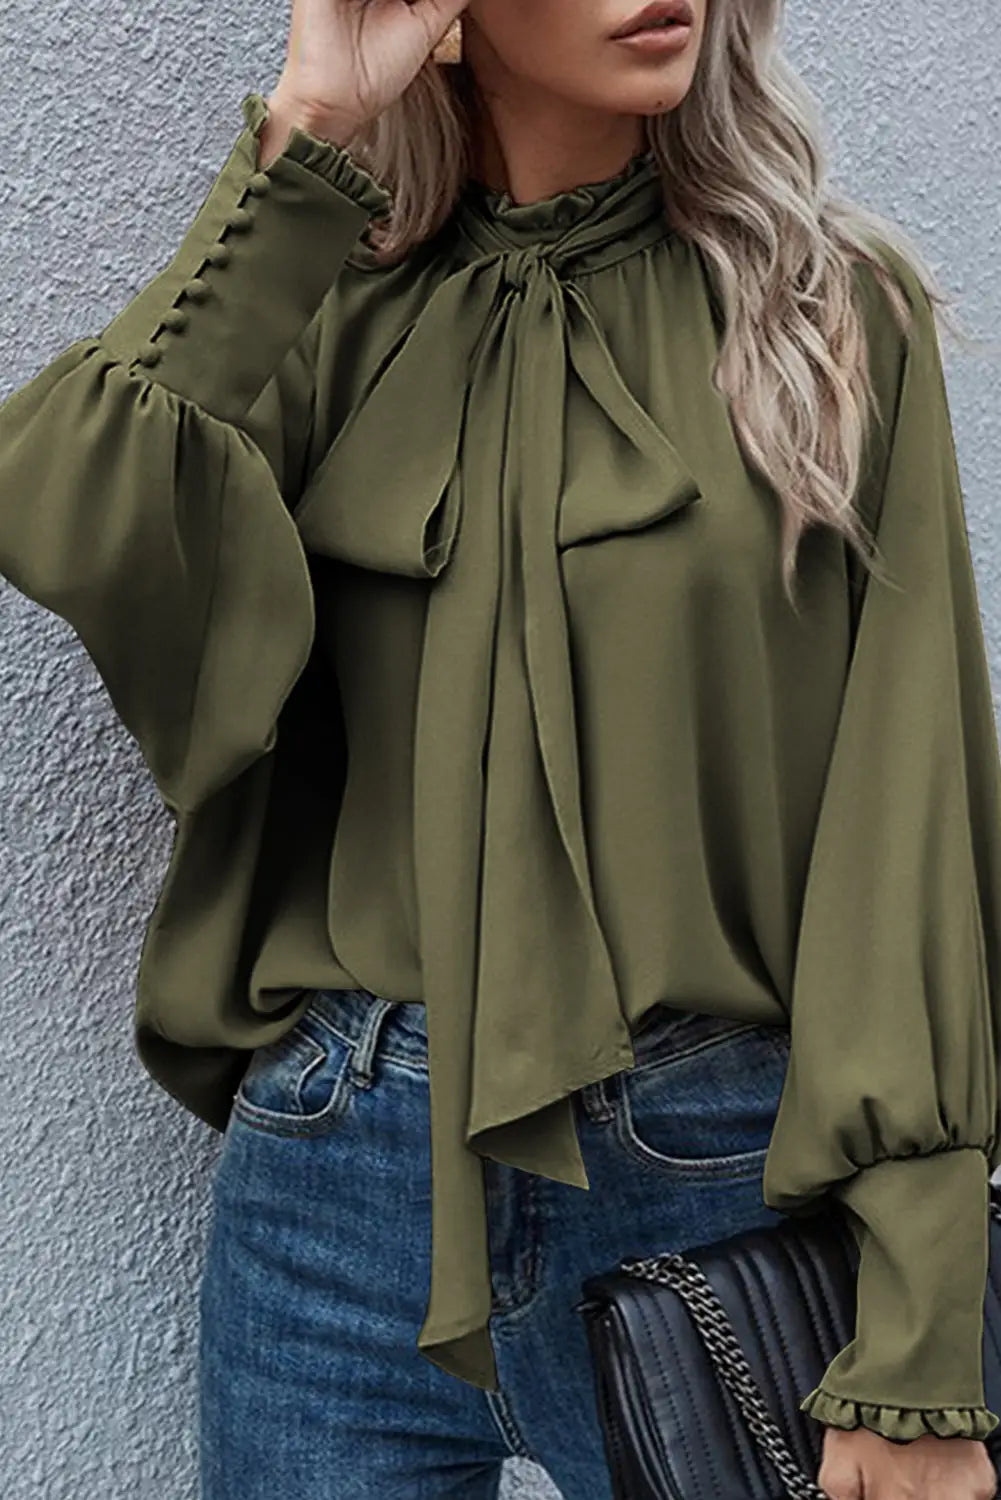 Pink frilled knotted mock neck bishop sleeve blouse - jungle green / l / 100% polyester - blouses & shirts